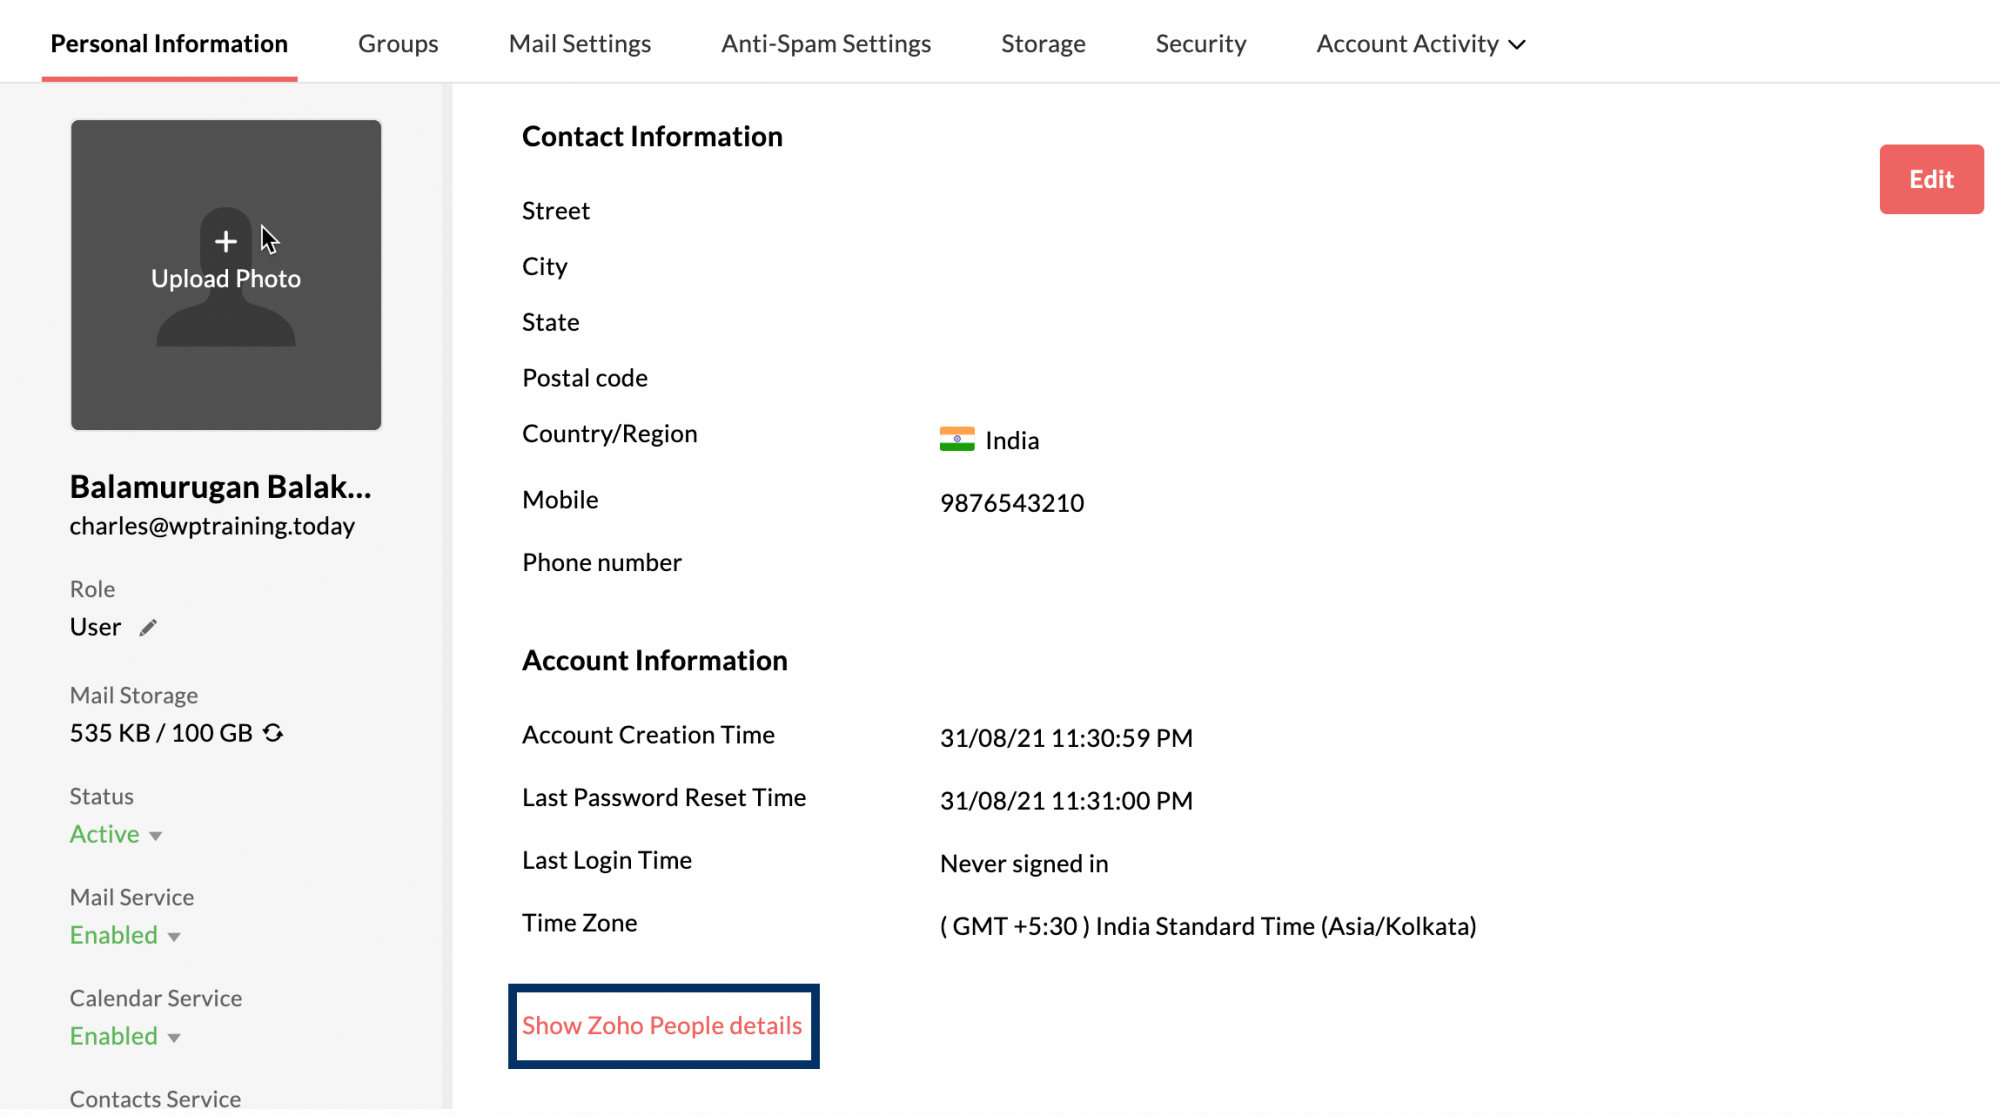 show Zoho People details